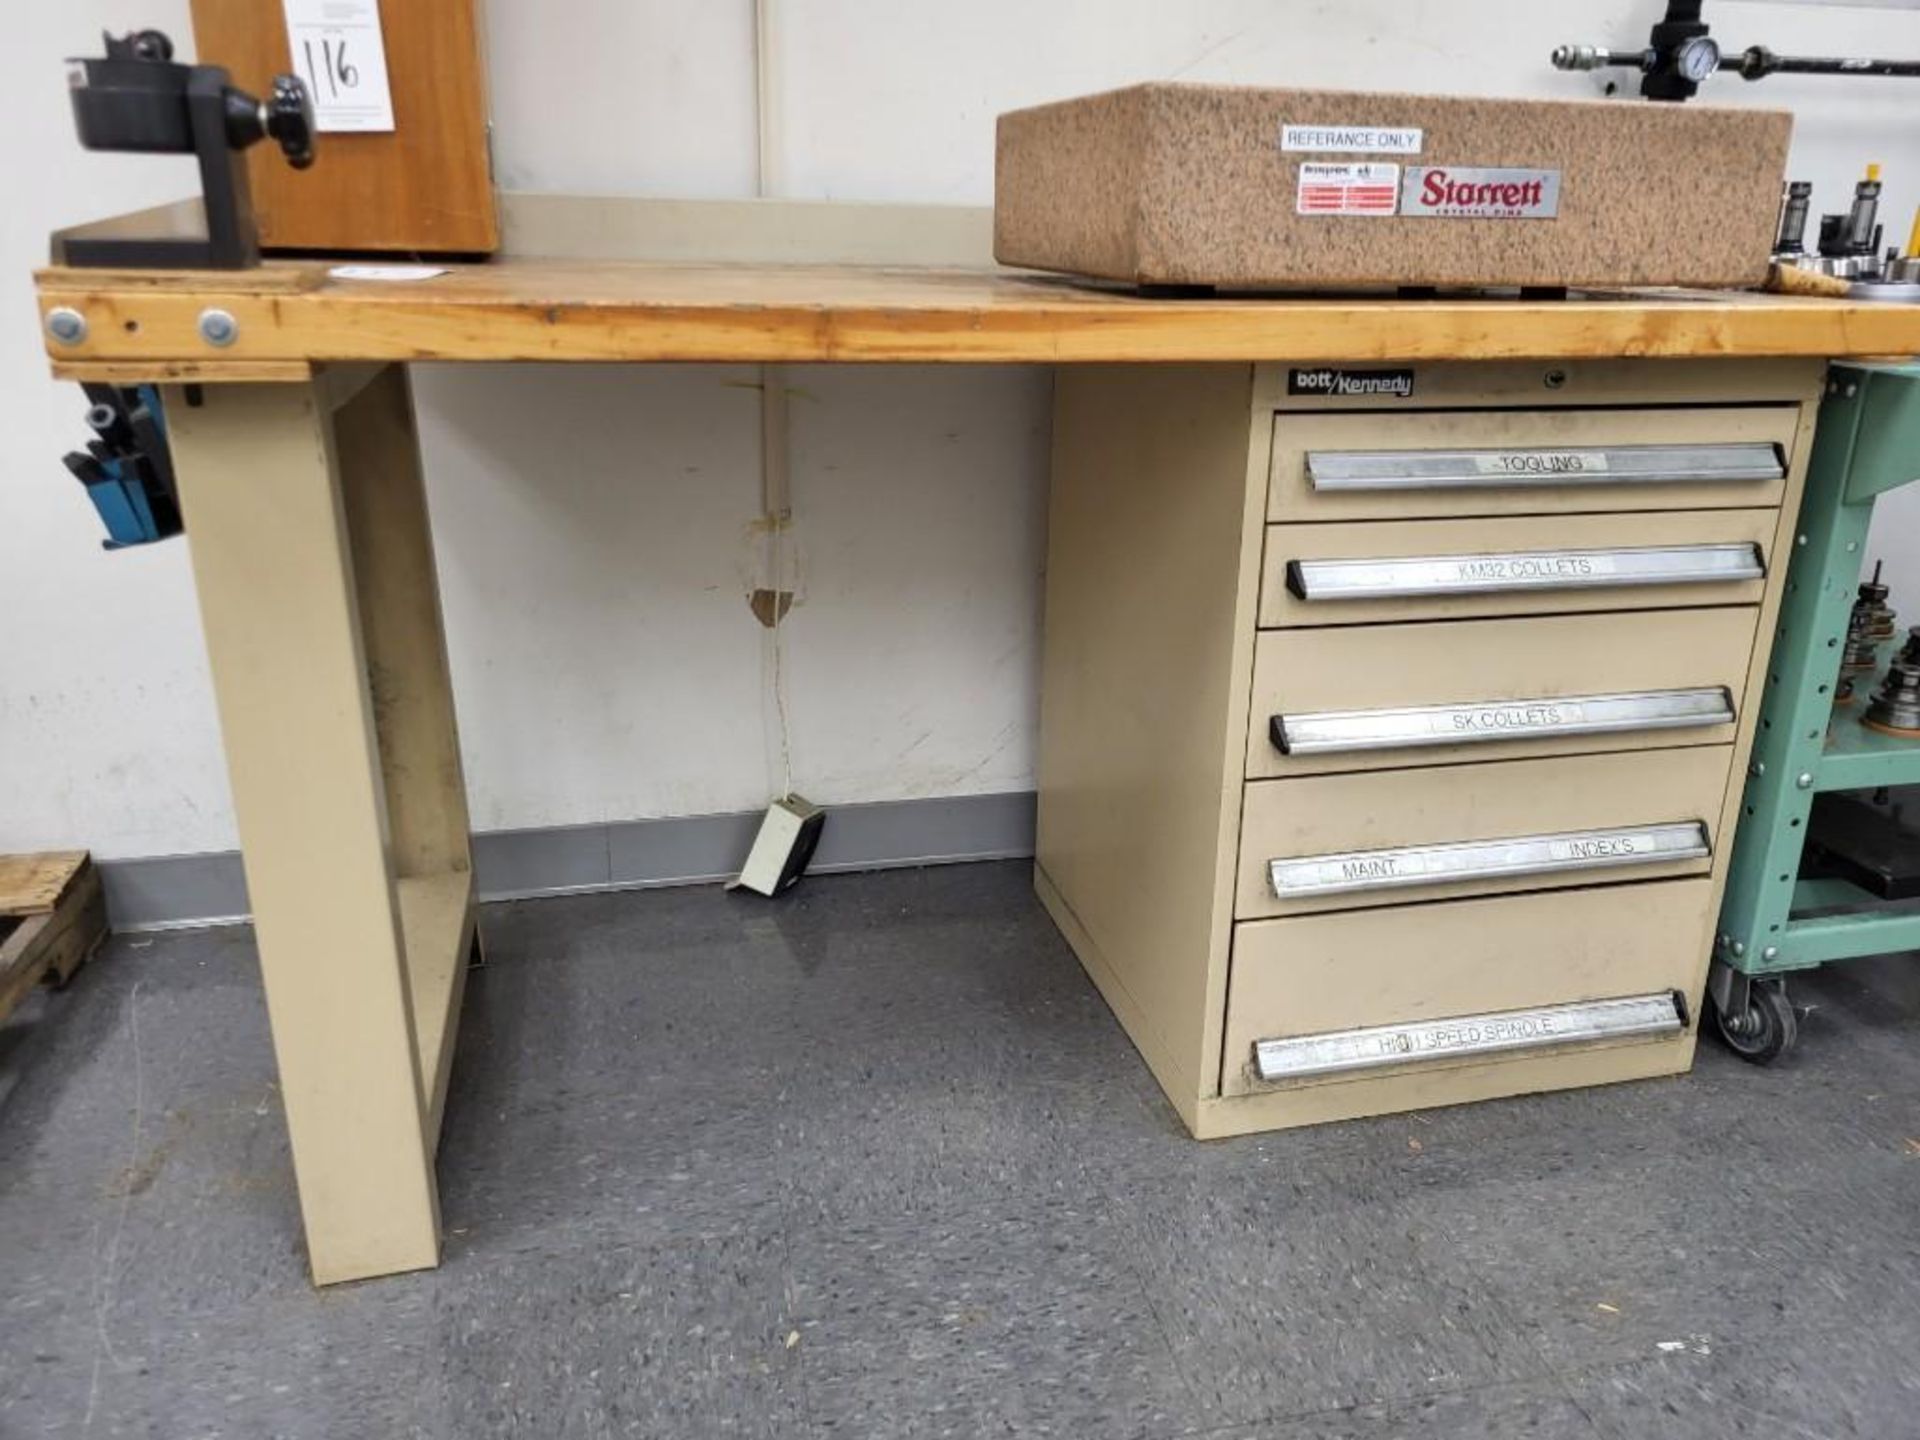 KENNEDY WORK STATION WITH 5 DRAWER CABINET FULL